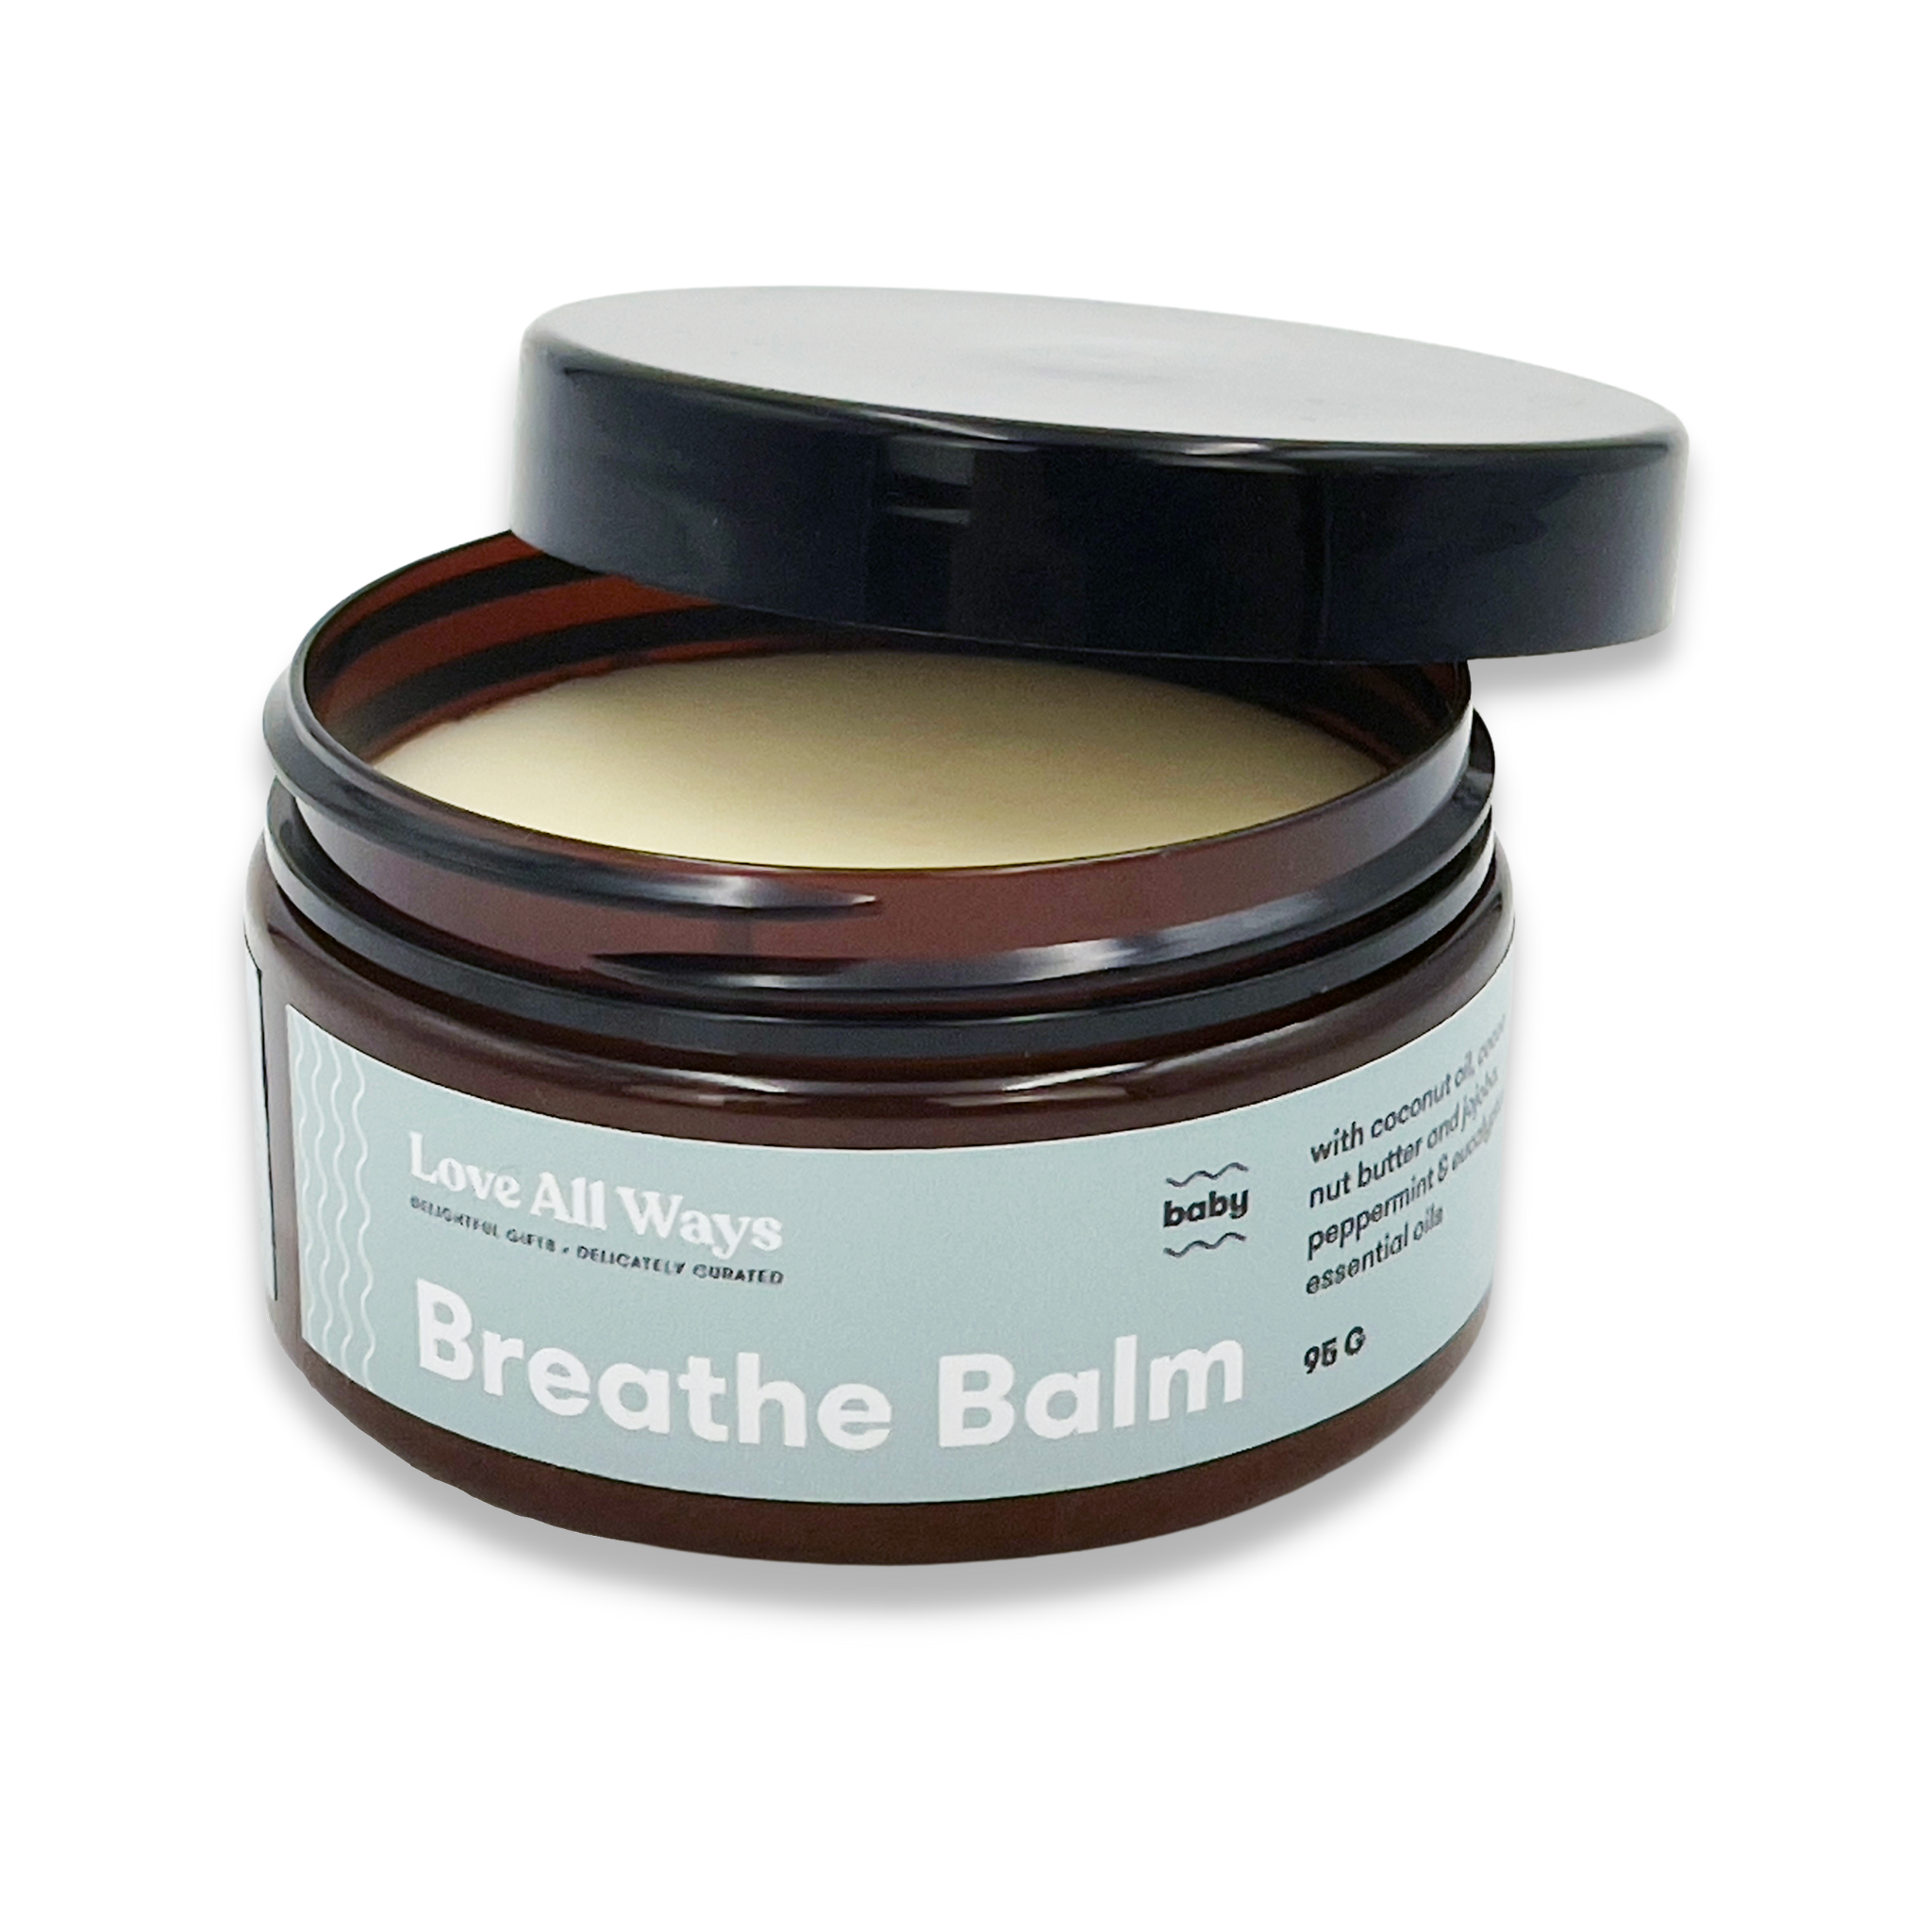 Love All Ways Organic Breathe Balm 95g with lid open